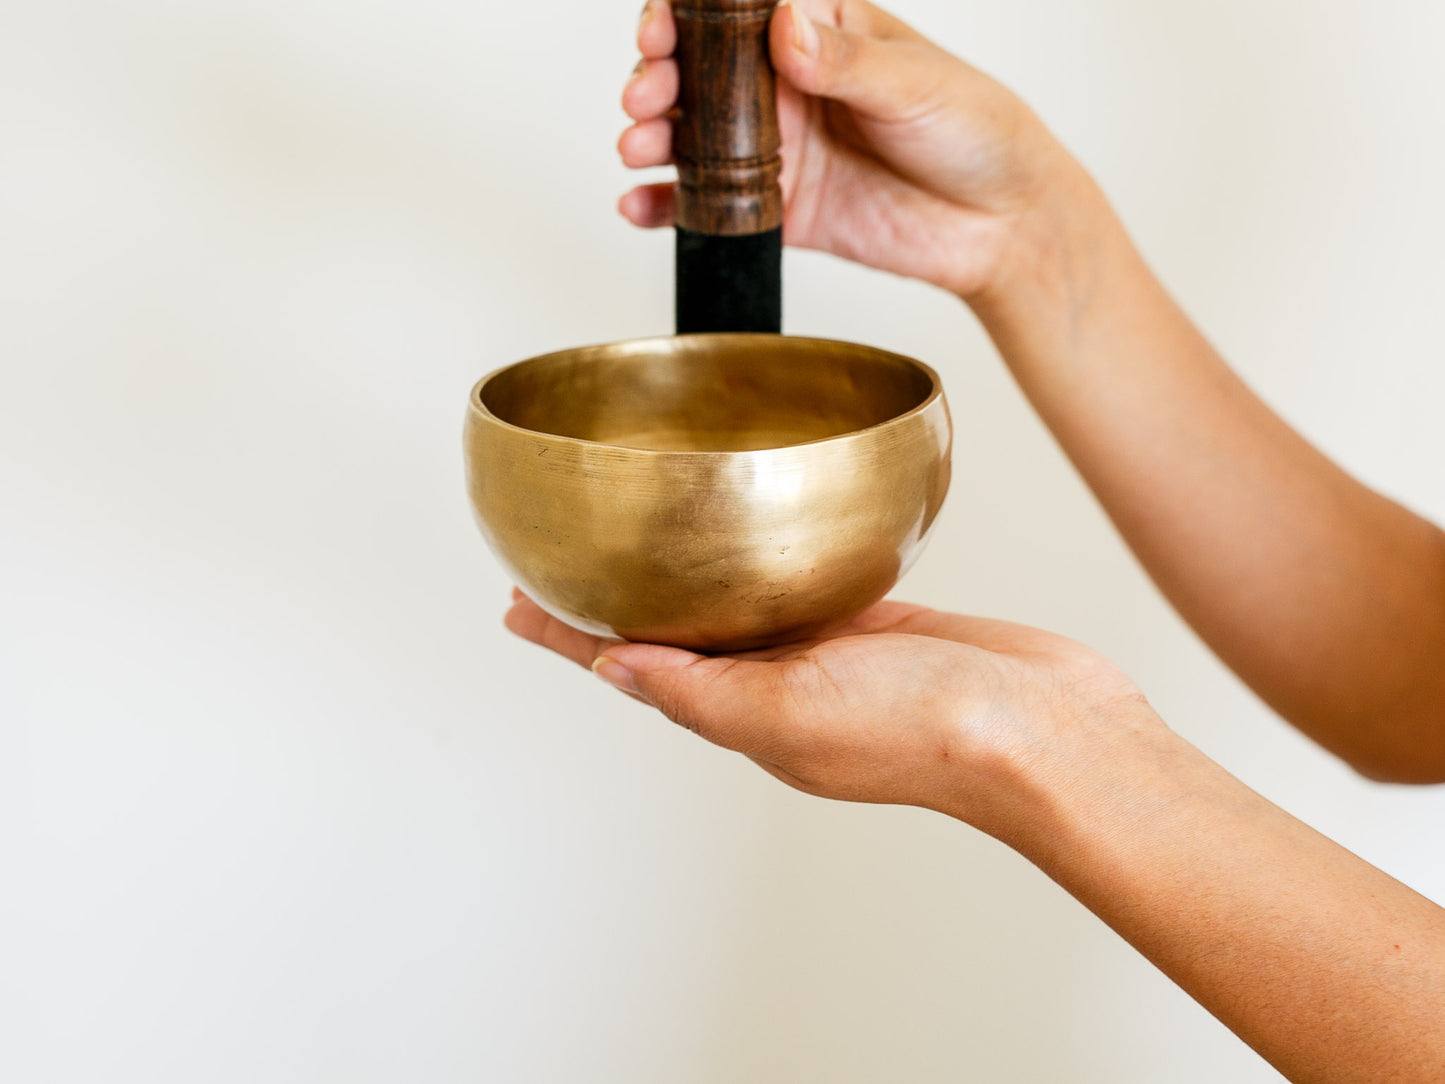 Small Contemporary Flow Singing Bowl - Base note C5 (534 Hz)